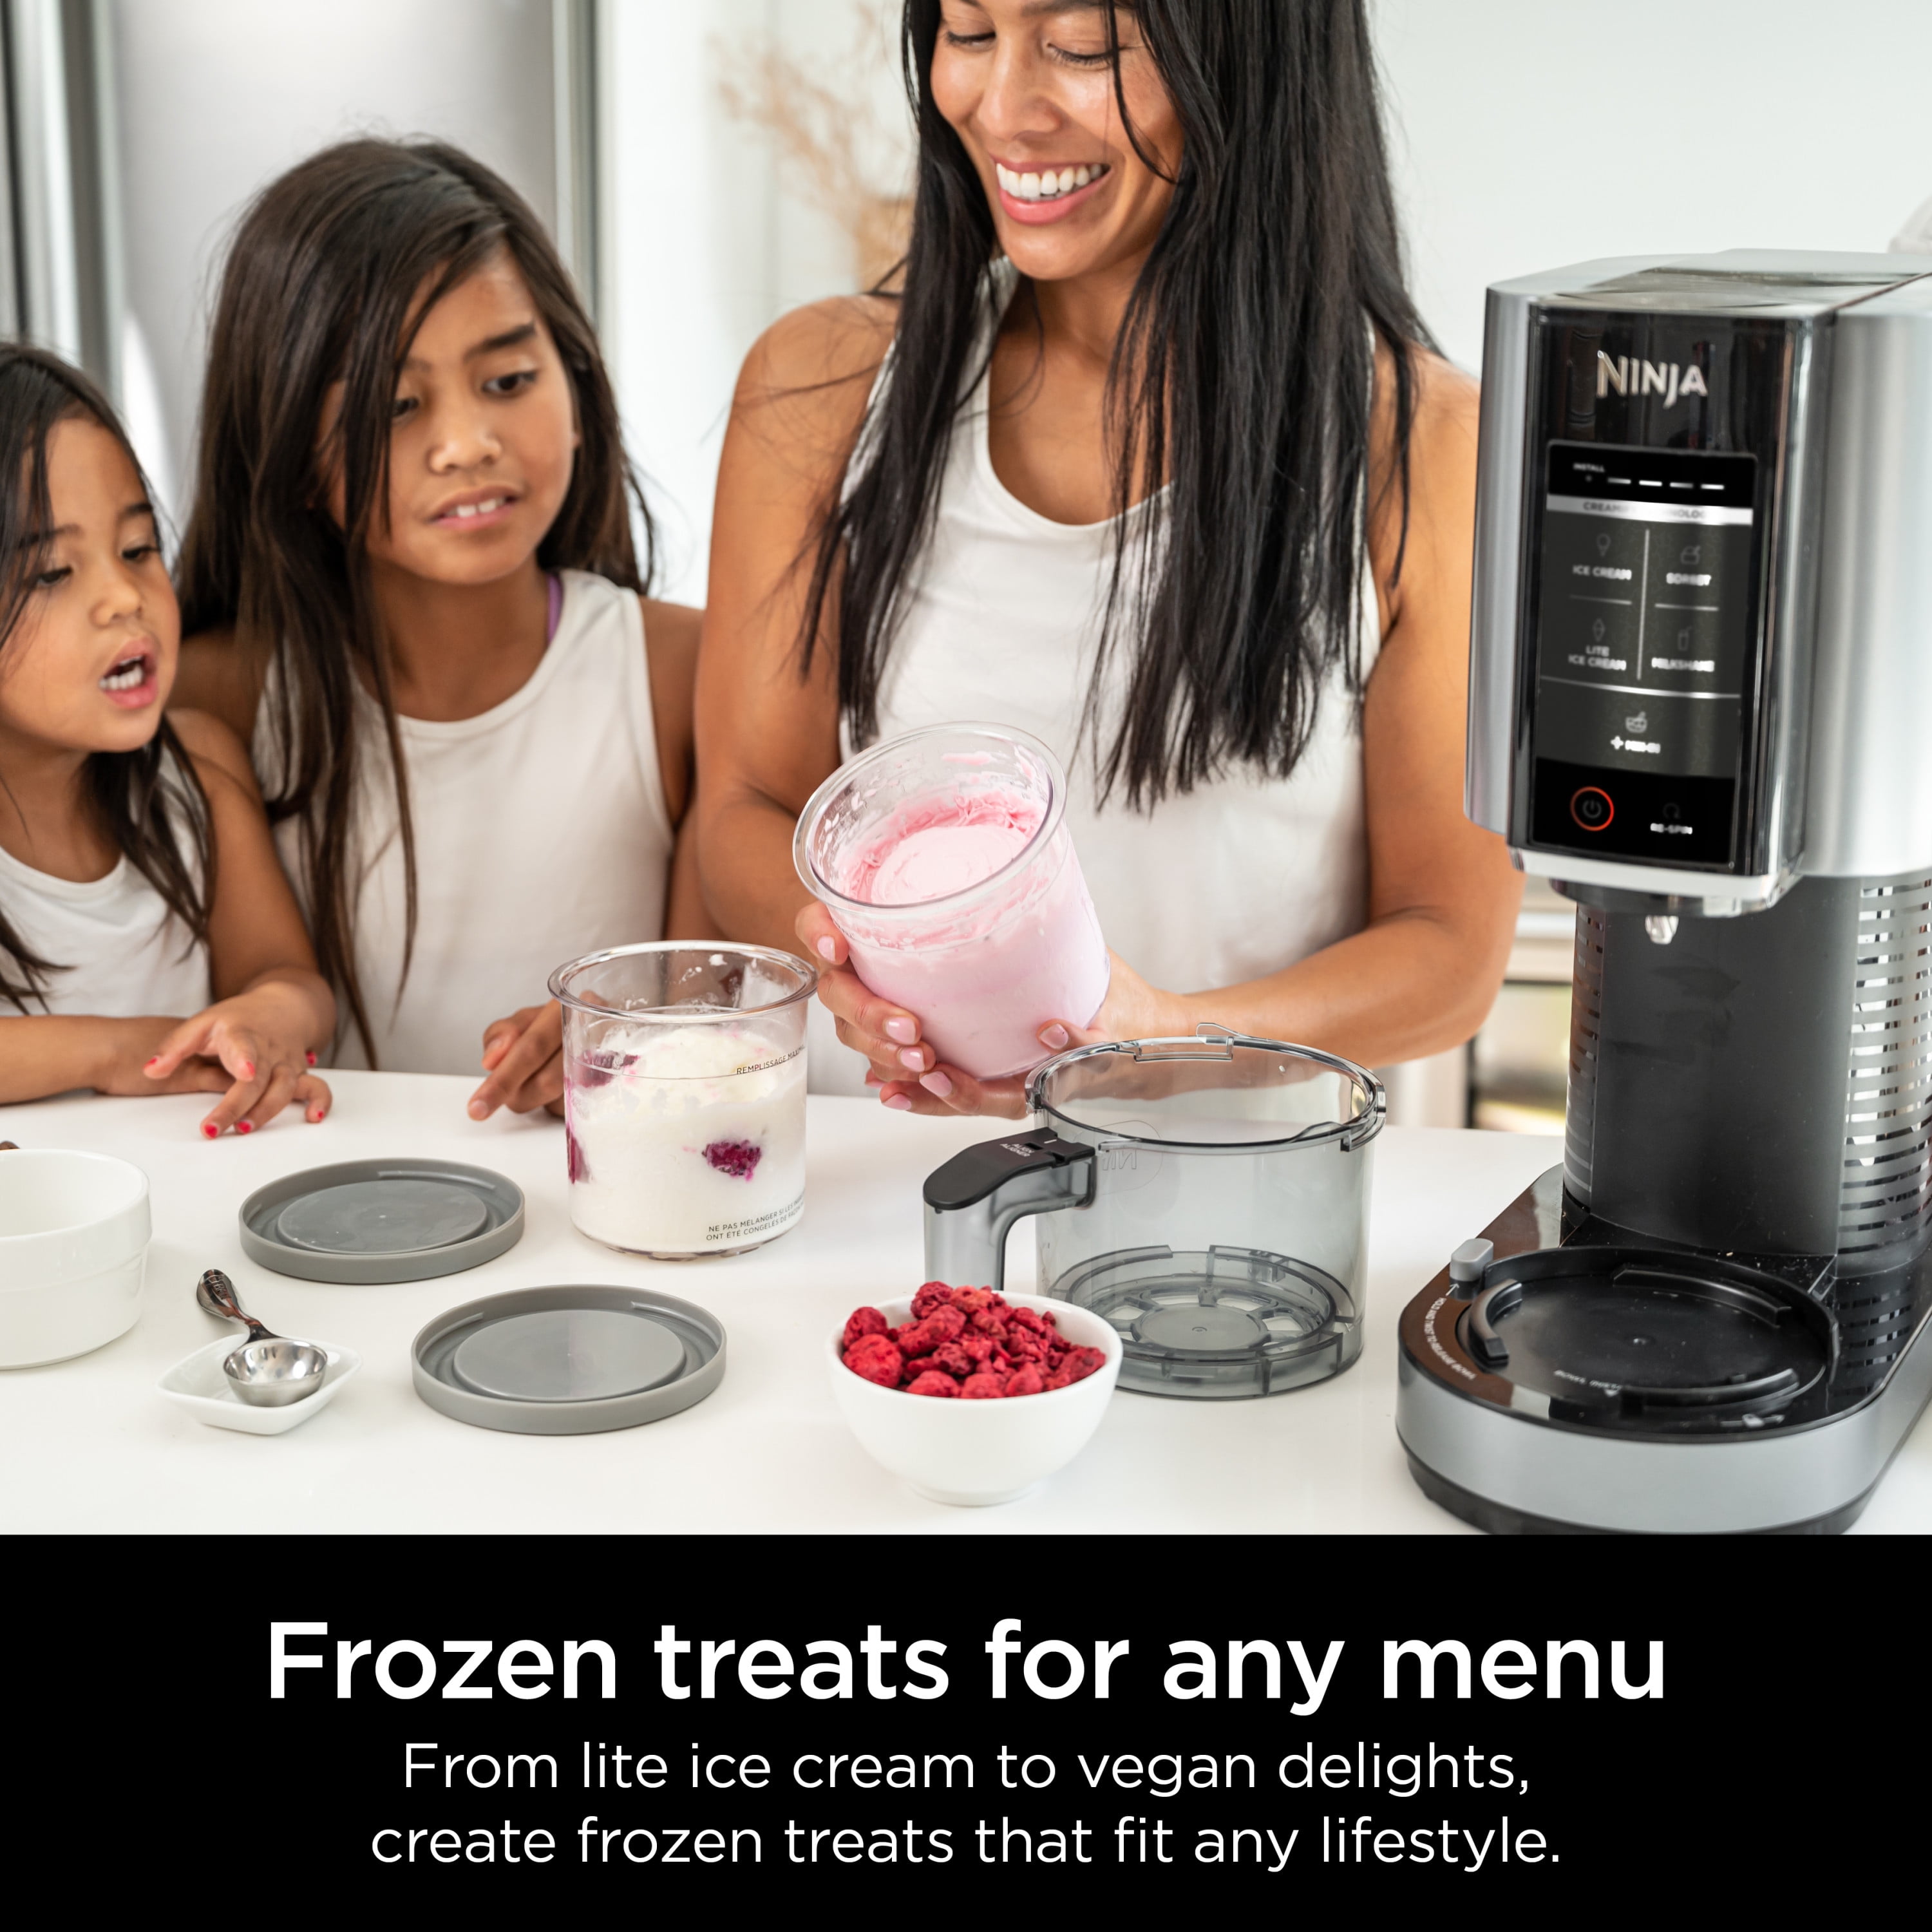  Ninja CN301CO CREAMi Ice Cream Maker, for Gelato, Mix-ins,  Milkshakes, Sorbet, Smoothie Bowls & More, 7 One-Touch Programs, with (3)  Pint Containers & Lids, Compact Size, Perfect for Kids, Black (Renewed)